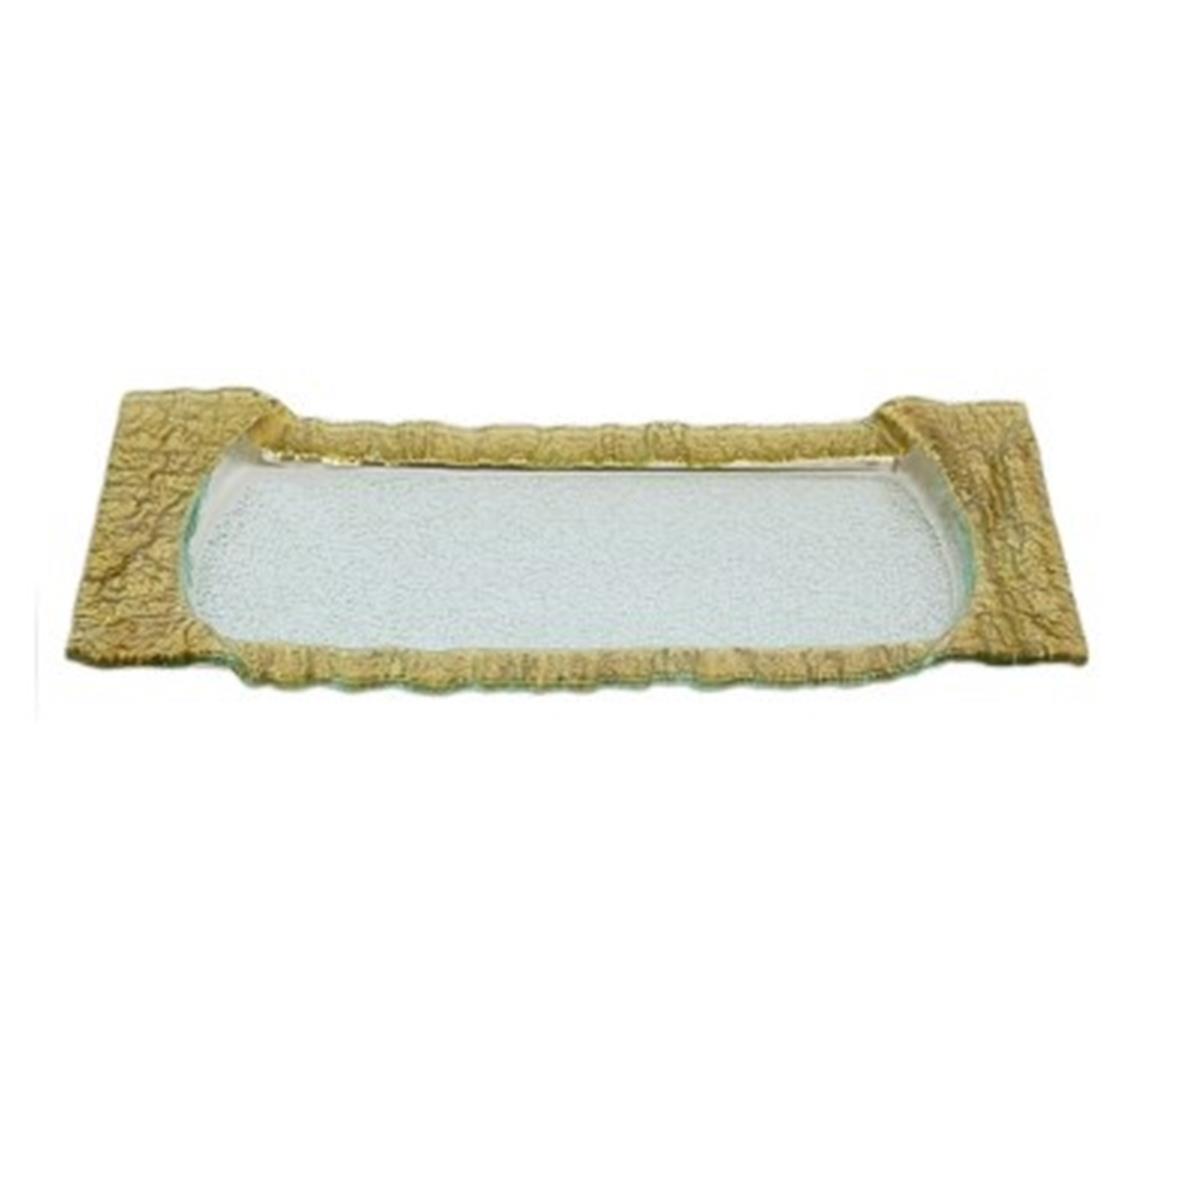 Classic Touch Ct146g 12.5 X 20 In. Large Rectangular Glass Tray With Gold Design